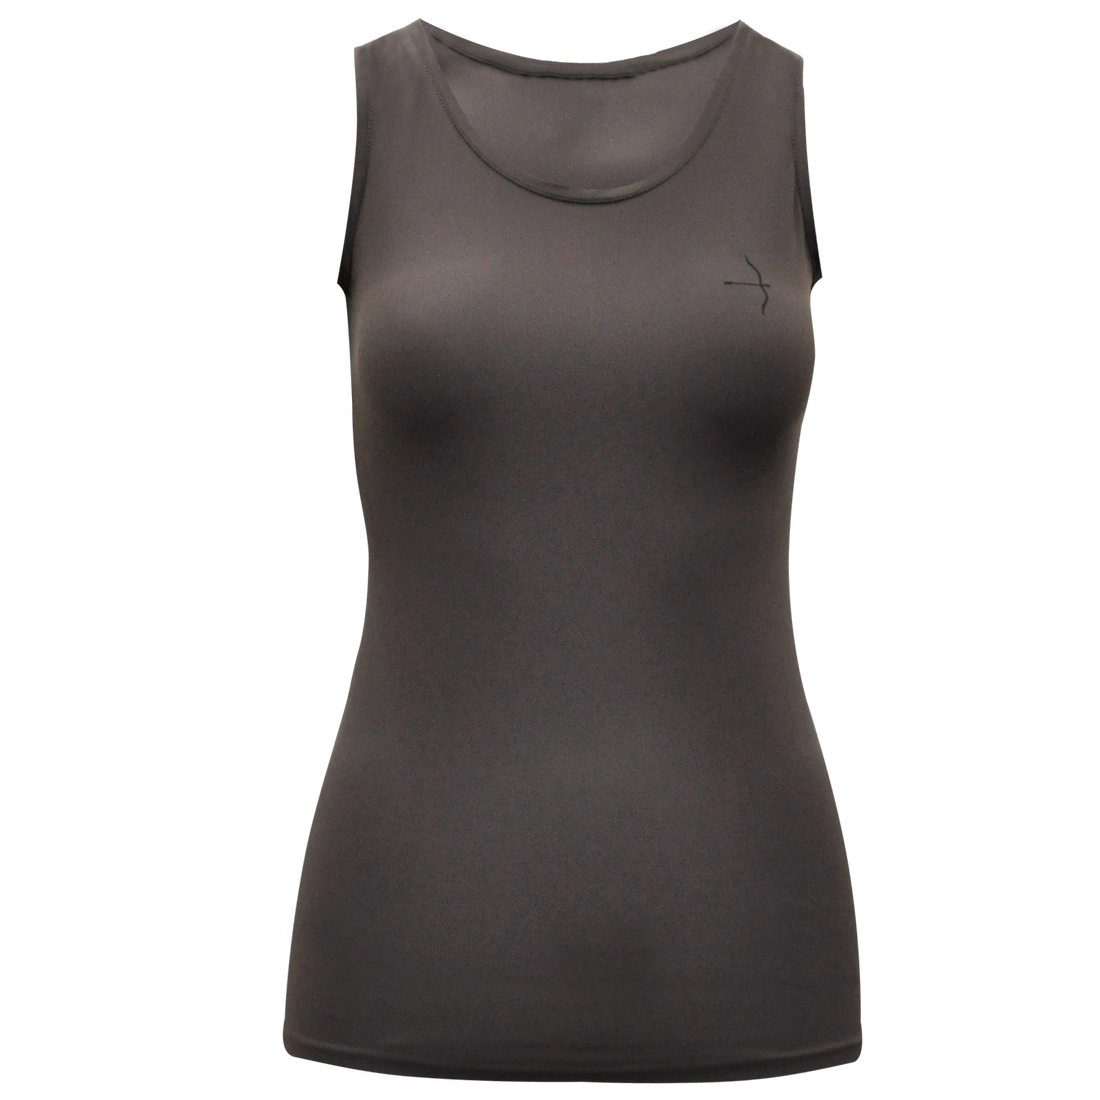 Reduced! Laguso Grey Training Vest Top